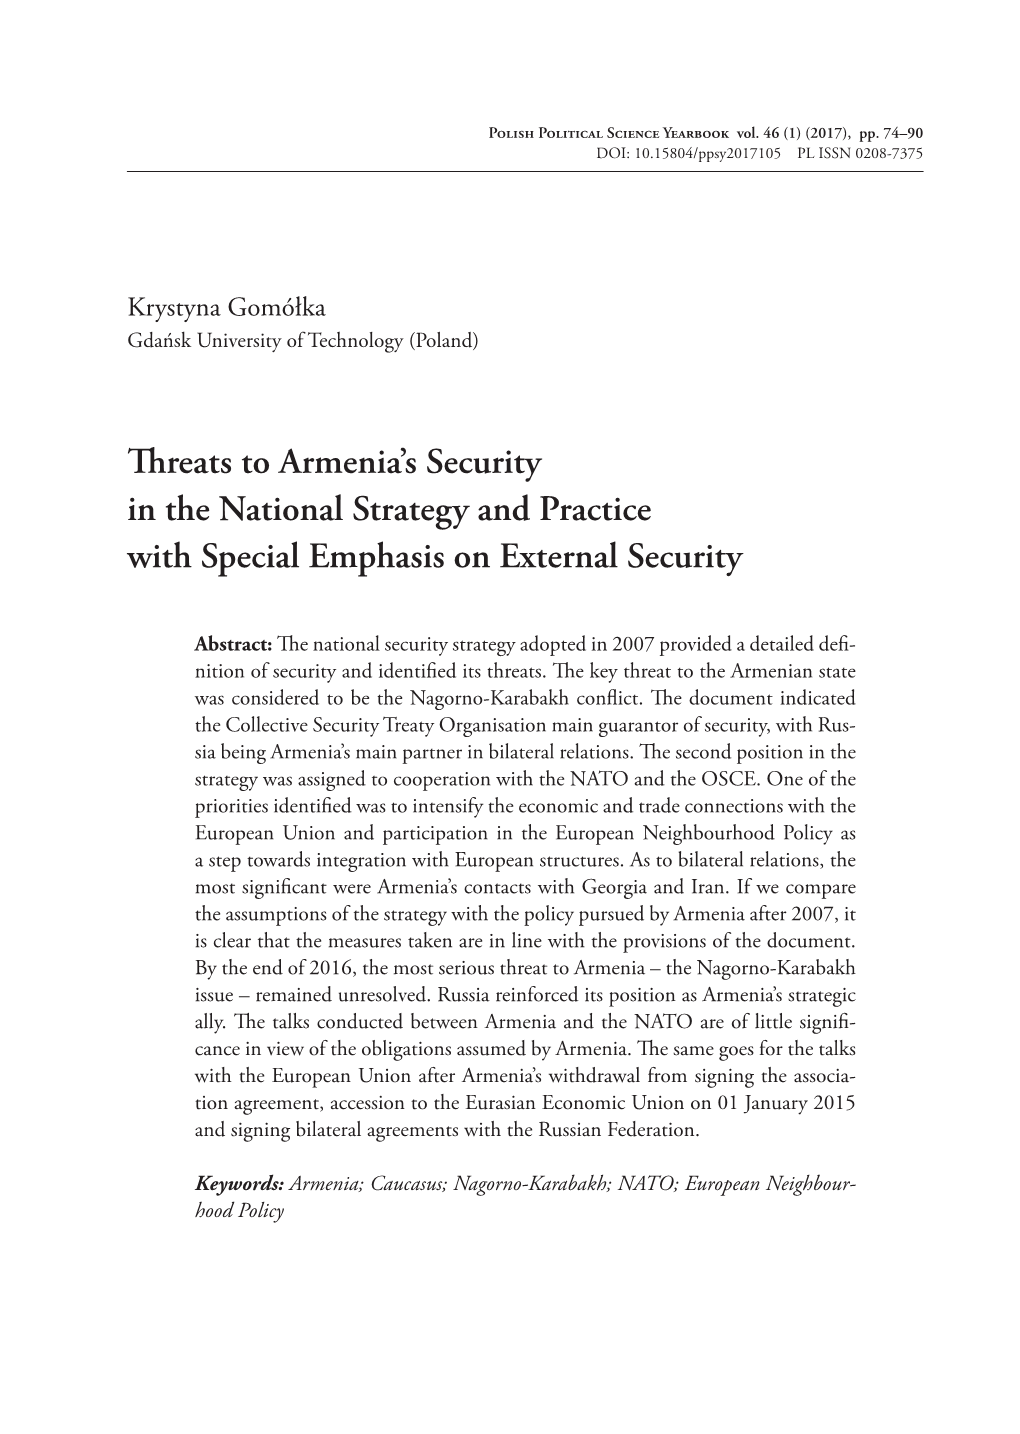 Threats to Armenia's Security in the National Strategy and Practice With